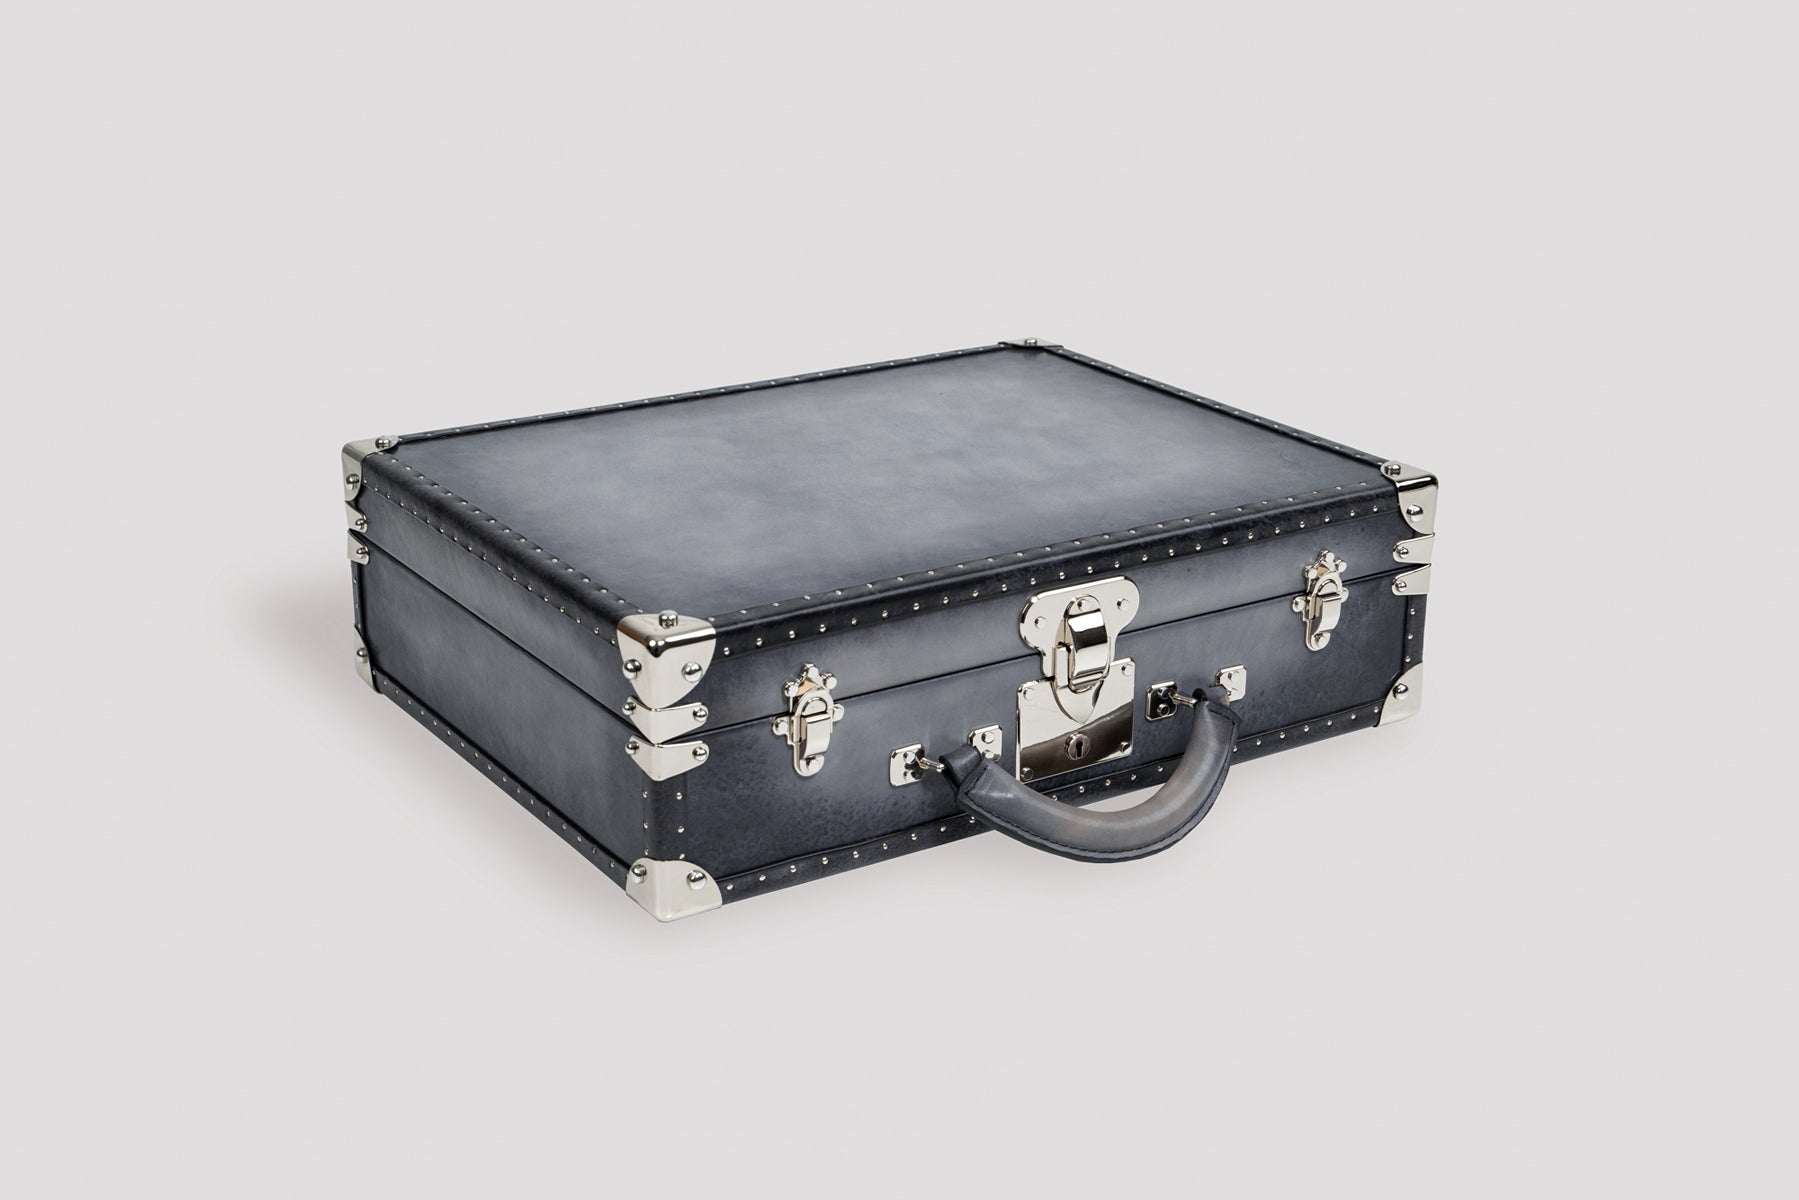 Bosphorus LeatherWatch Trunk - Patina Grey for 21 Watches